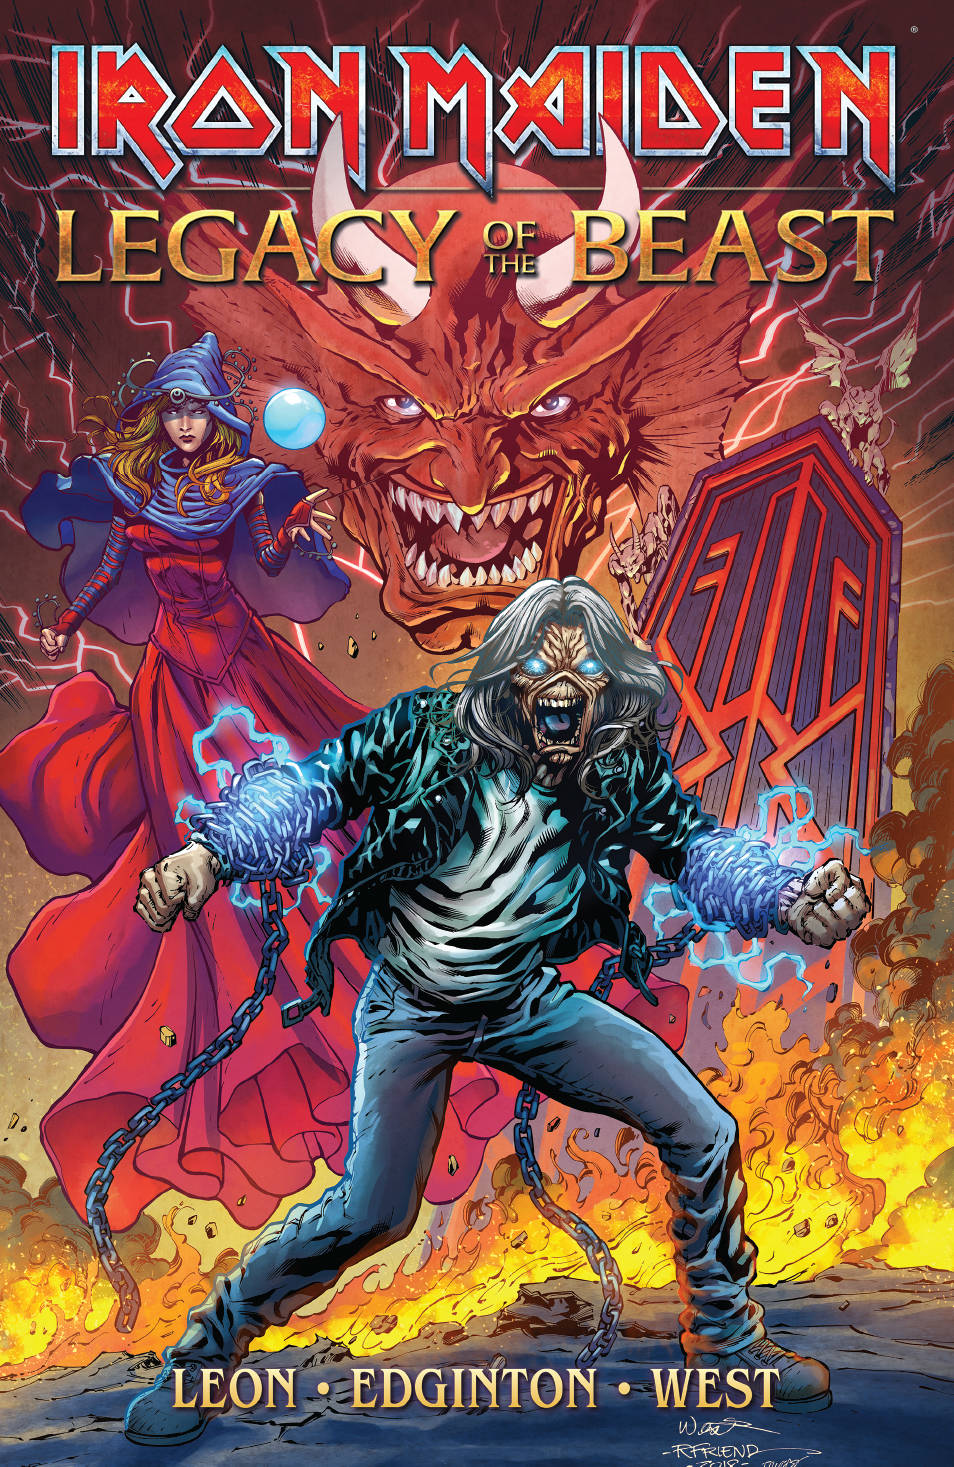 Iron Maiden: Legacy Of The Beast vol 1 s/c